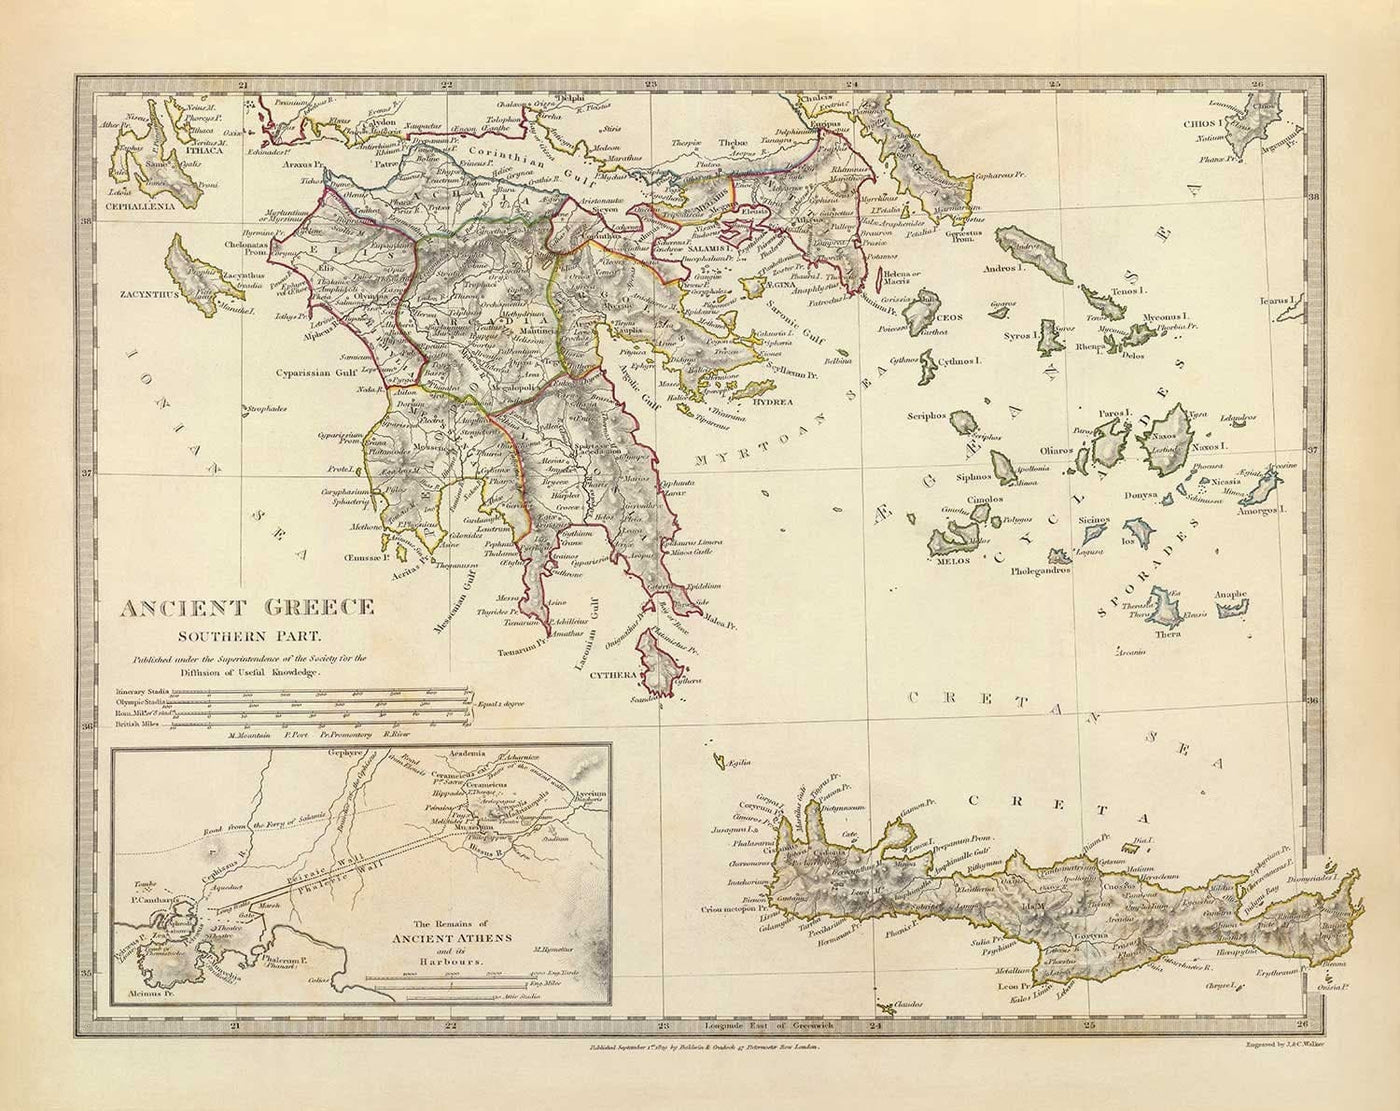 Old Map of Ancient Greece, 1829, by SDUK - Crete, Aegean, Athens, Arcadia, Attica, Cyclades, Zakynthos